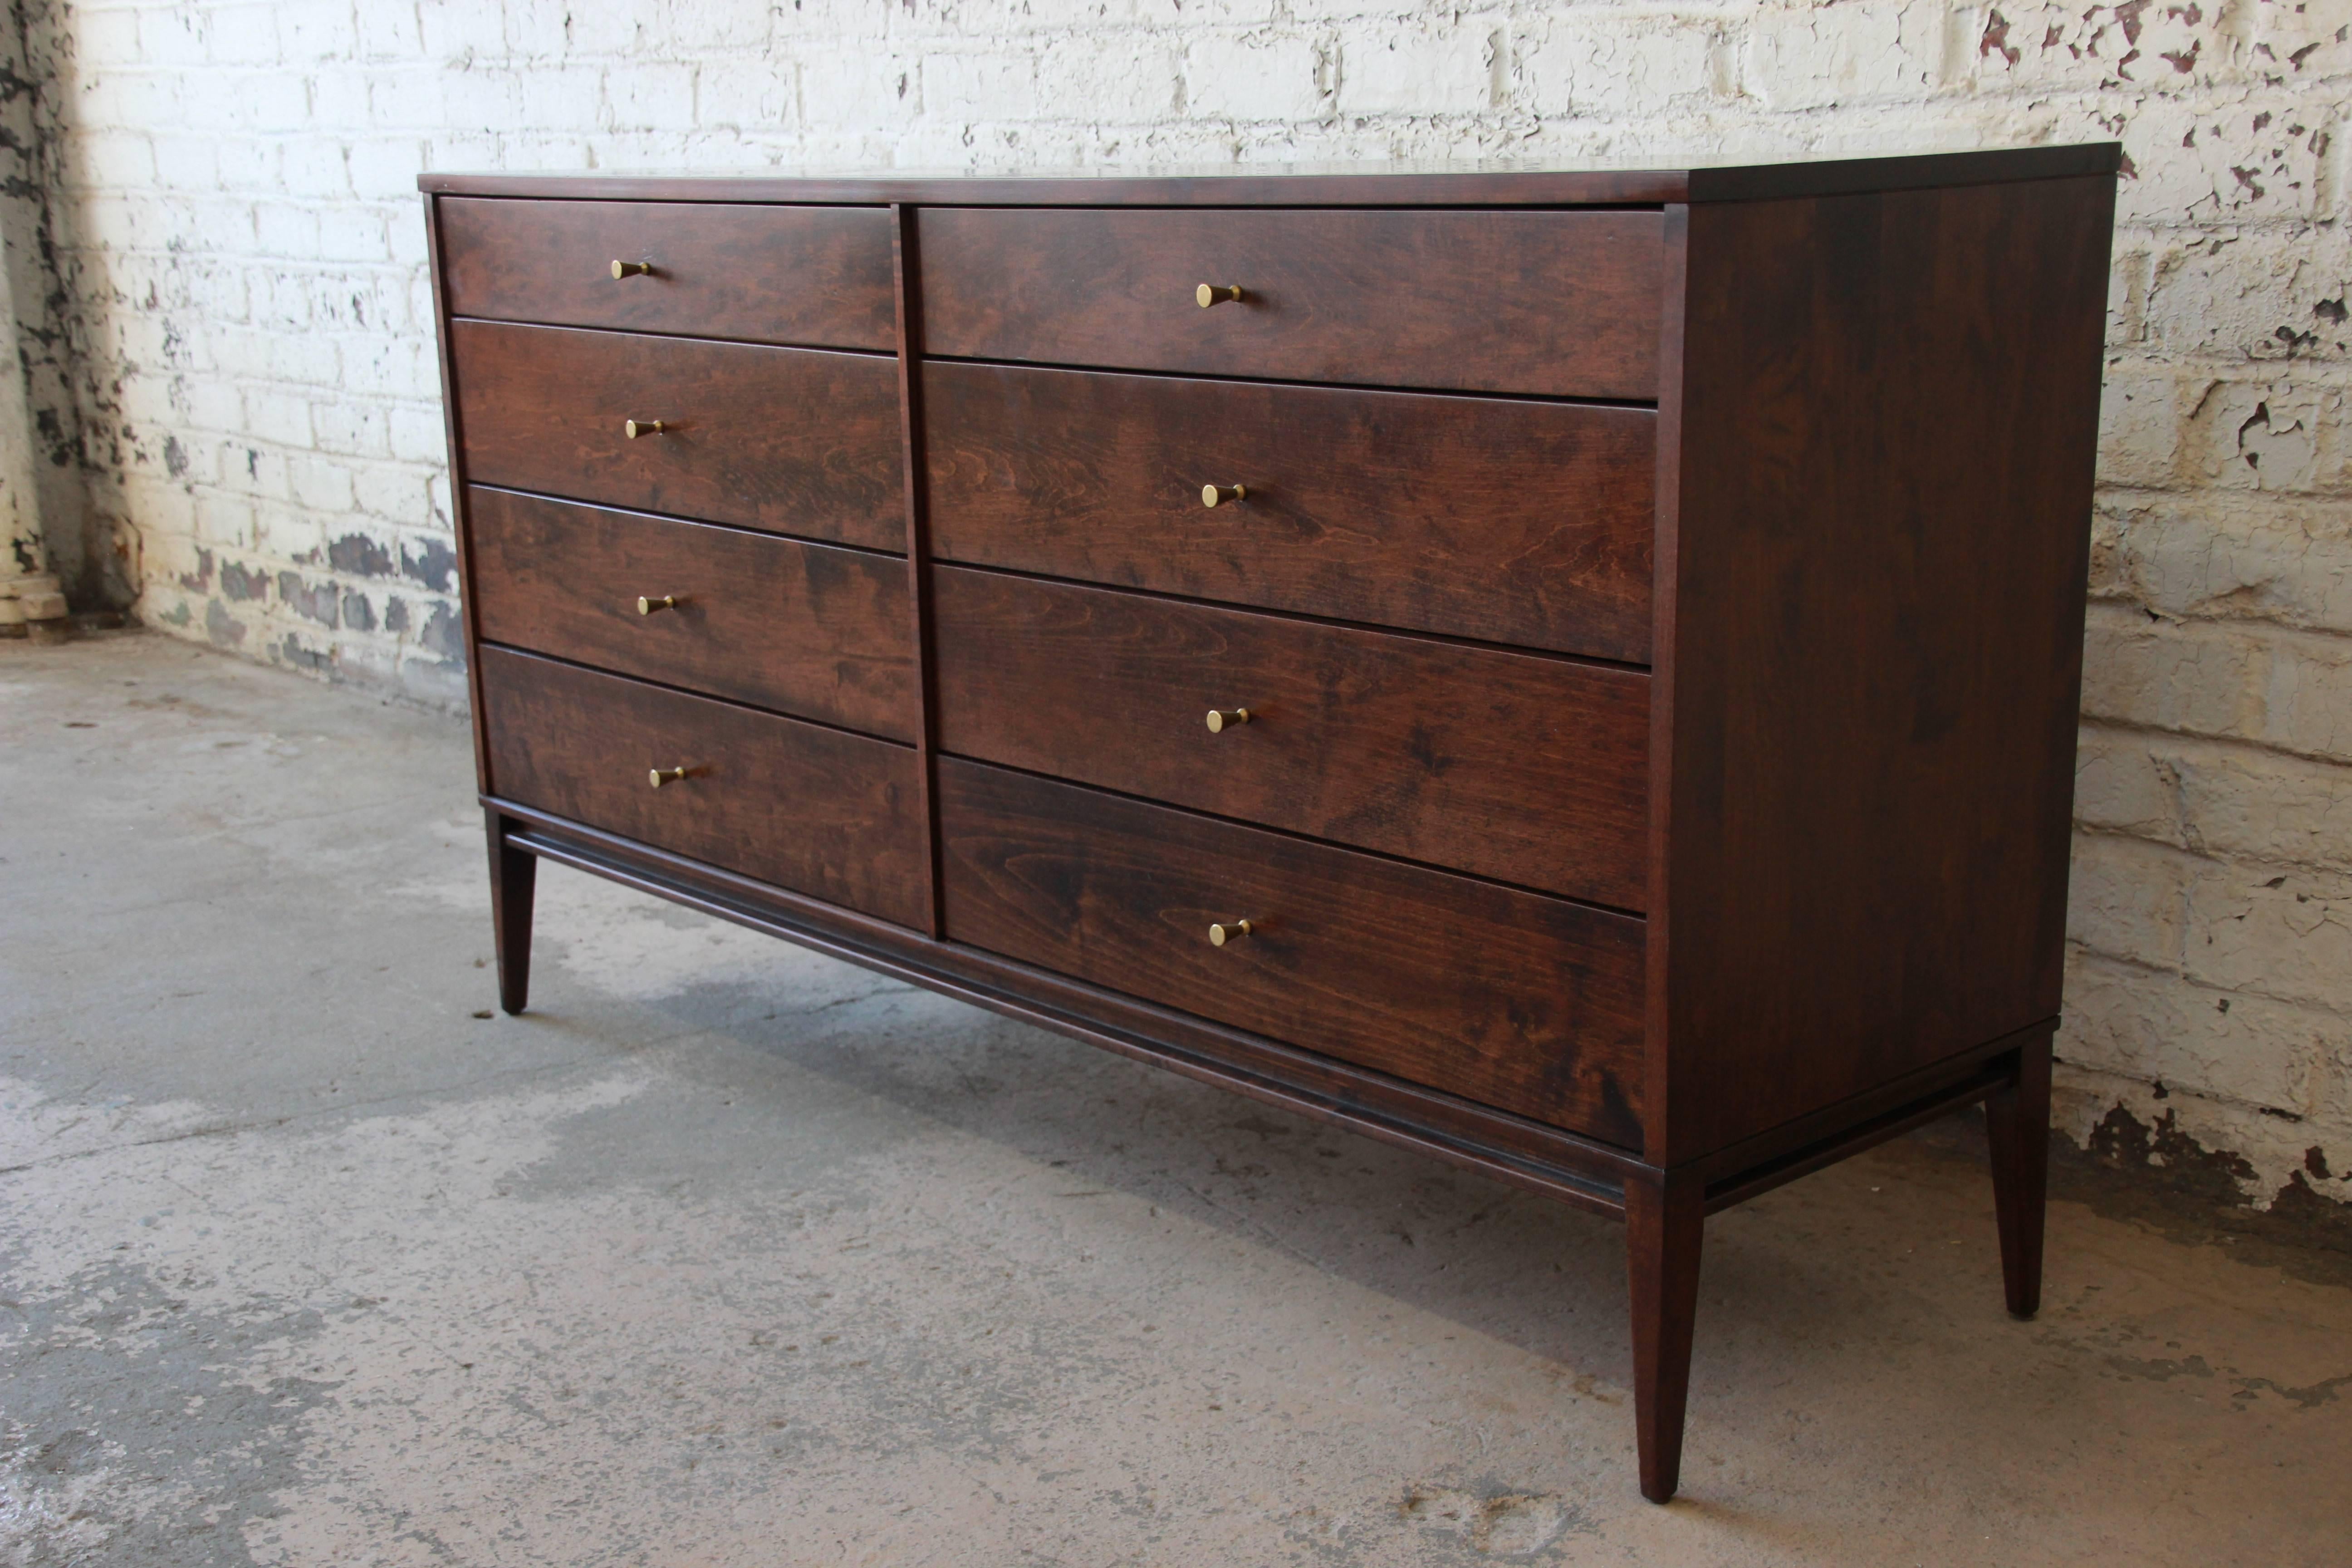 An outstanding Mid-Century Modern eight-drawer dresser or credenza designed by Paul McCobb for his iconic Planner Group line for Winchendon Furniture. The dresser features exceptional solid birch wood construction, and a body raised on slim, tapered